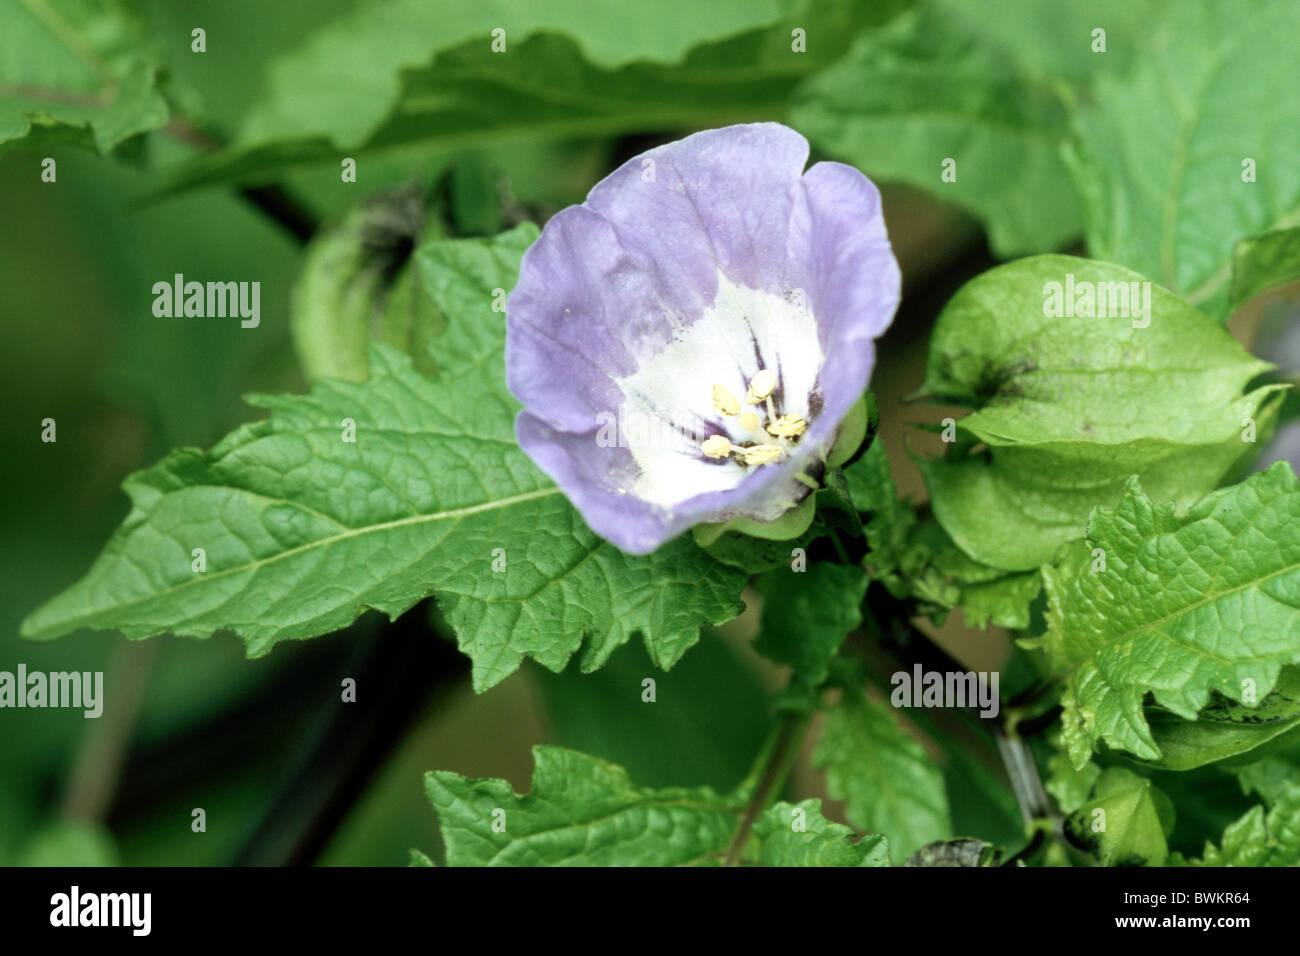 Apple of Peru, Shoo-fly (Nicandra physalodes, Nicandra physaloides), flower. Stock Photo